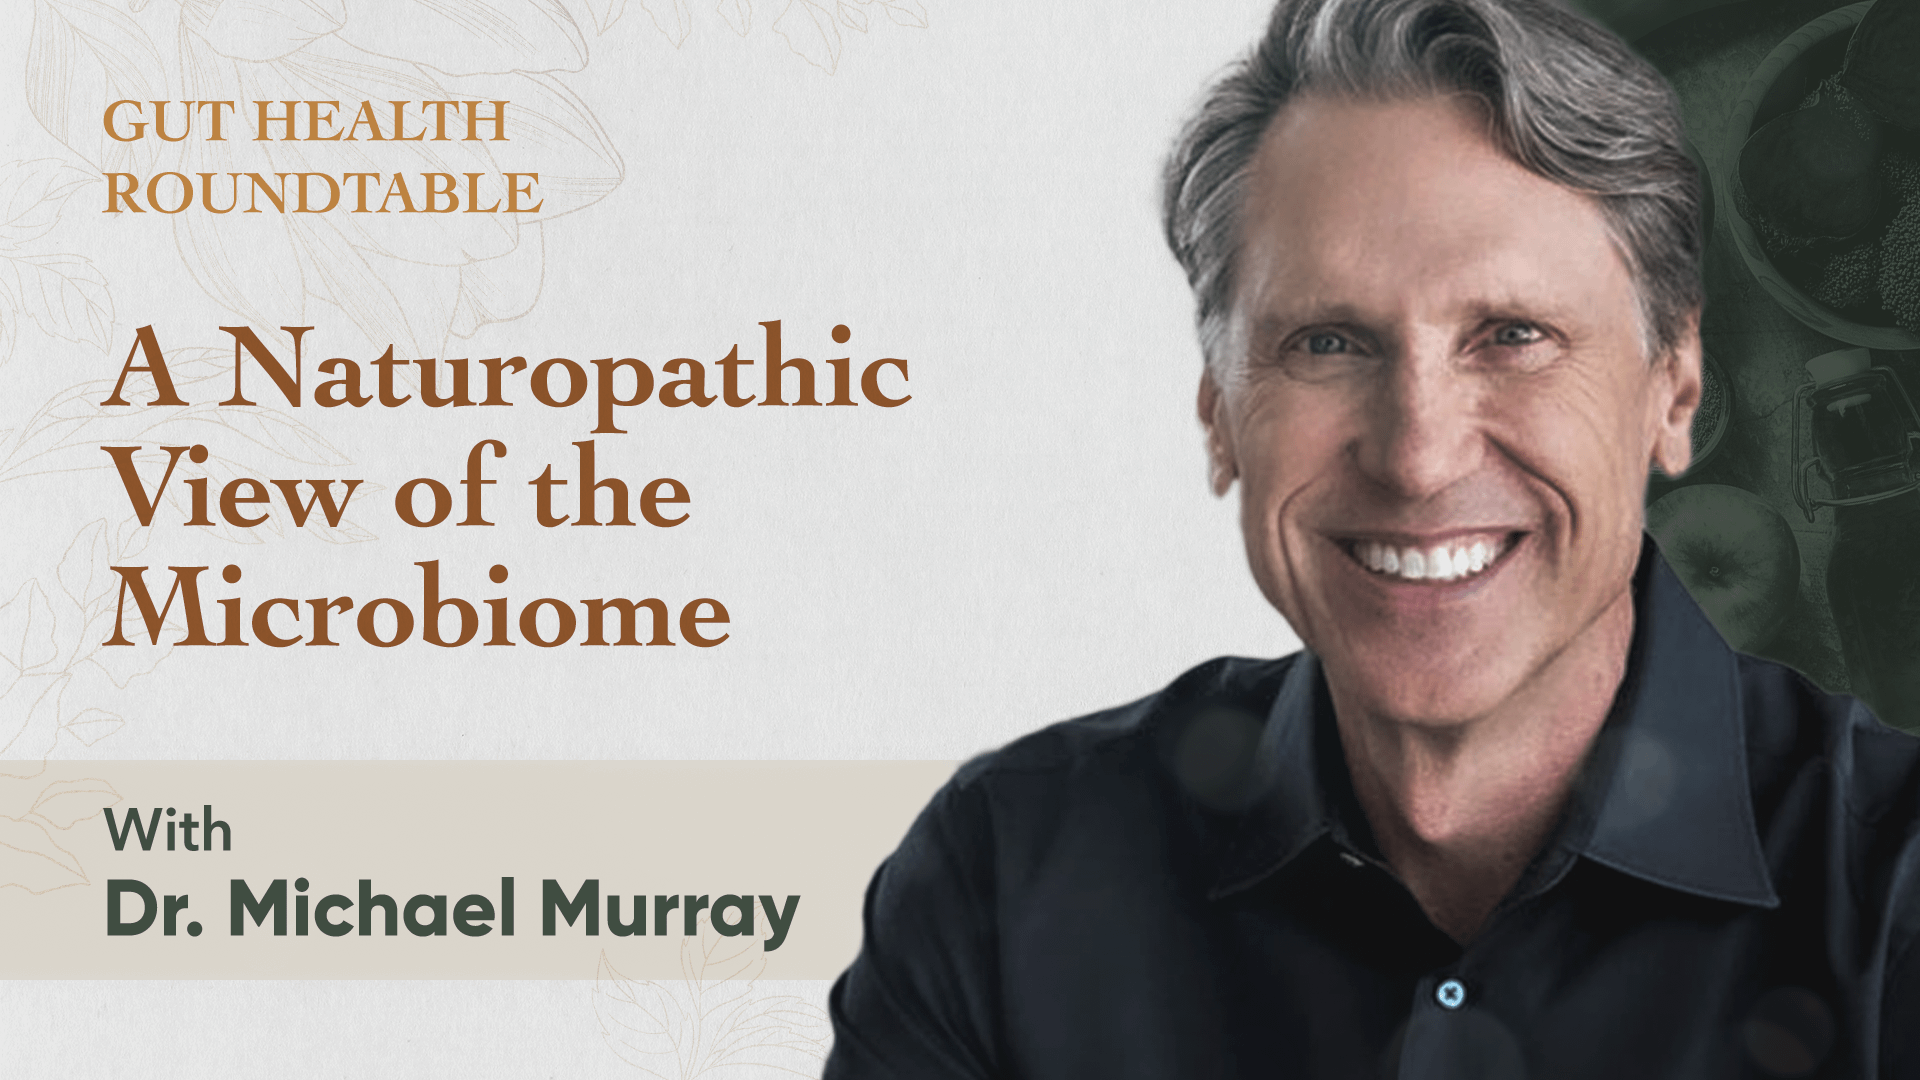 A Naturopathic View of the Microbiome